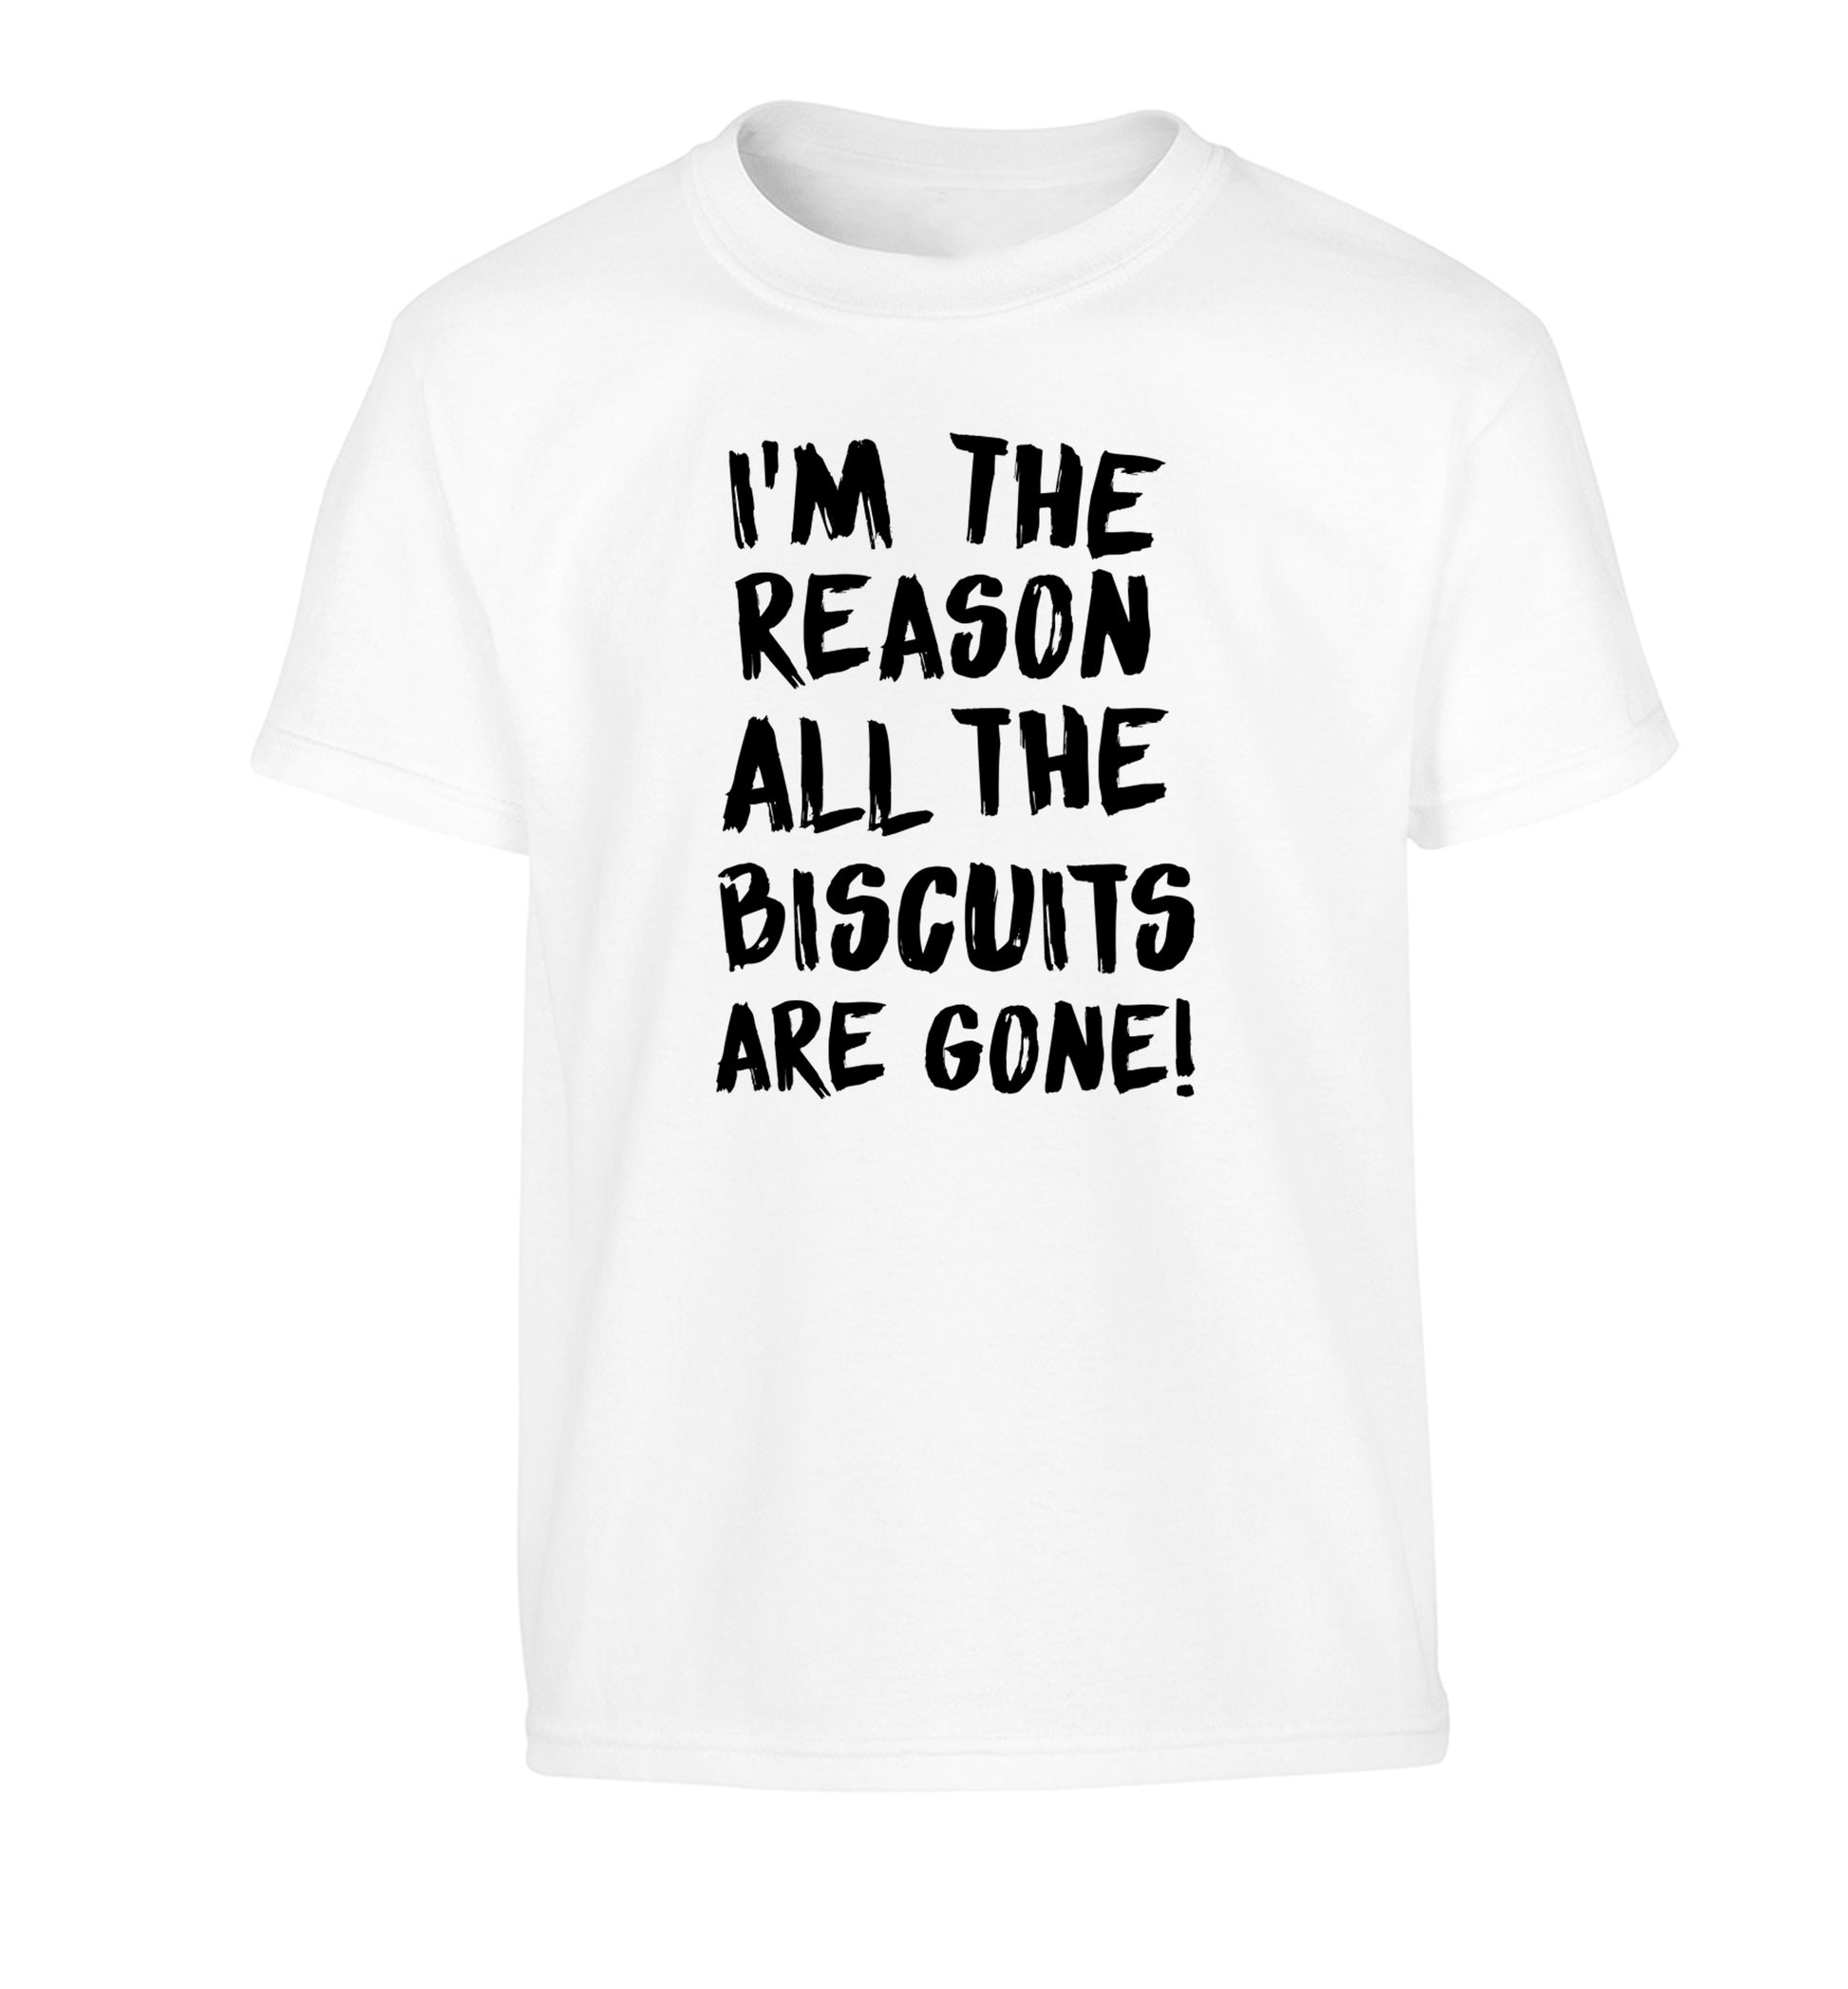 I'm the reason why all the biscuits are gone Children's white Tshirt 12-13 Years